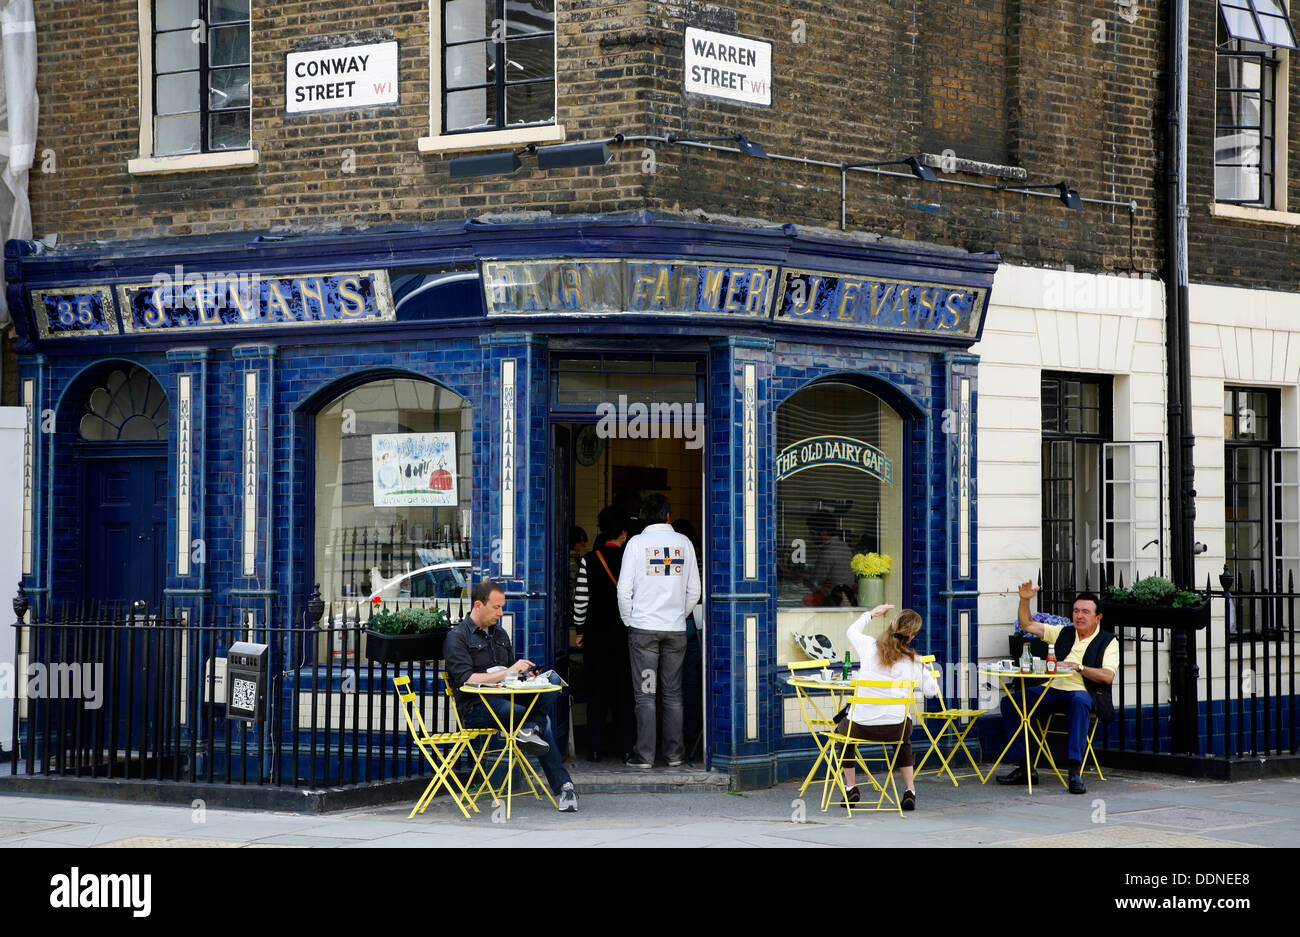 Old Dairy Cafe on the corner of Conway Street and Warren Street, Fitzrovia, London, UK Stock Photo